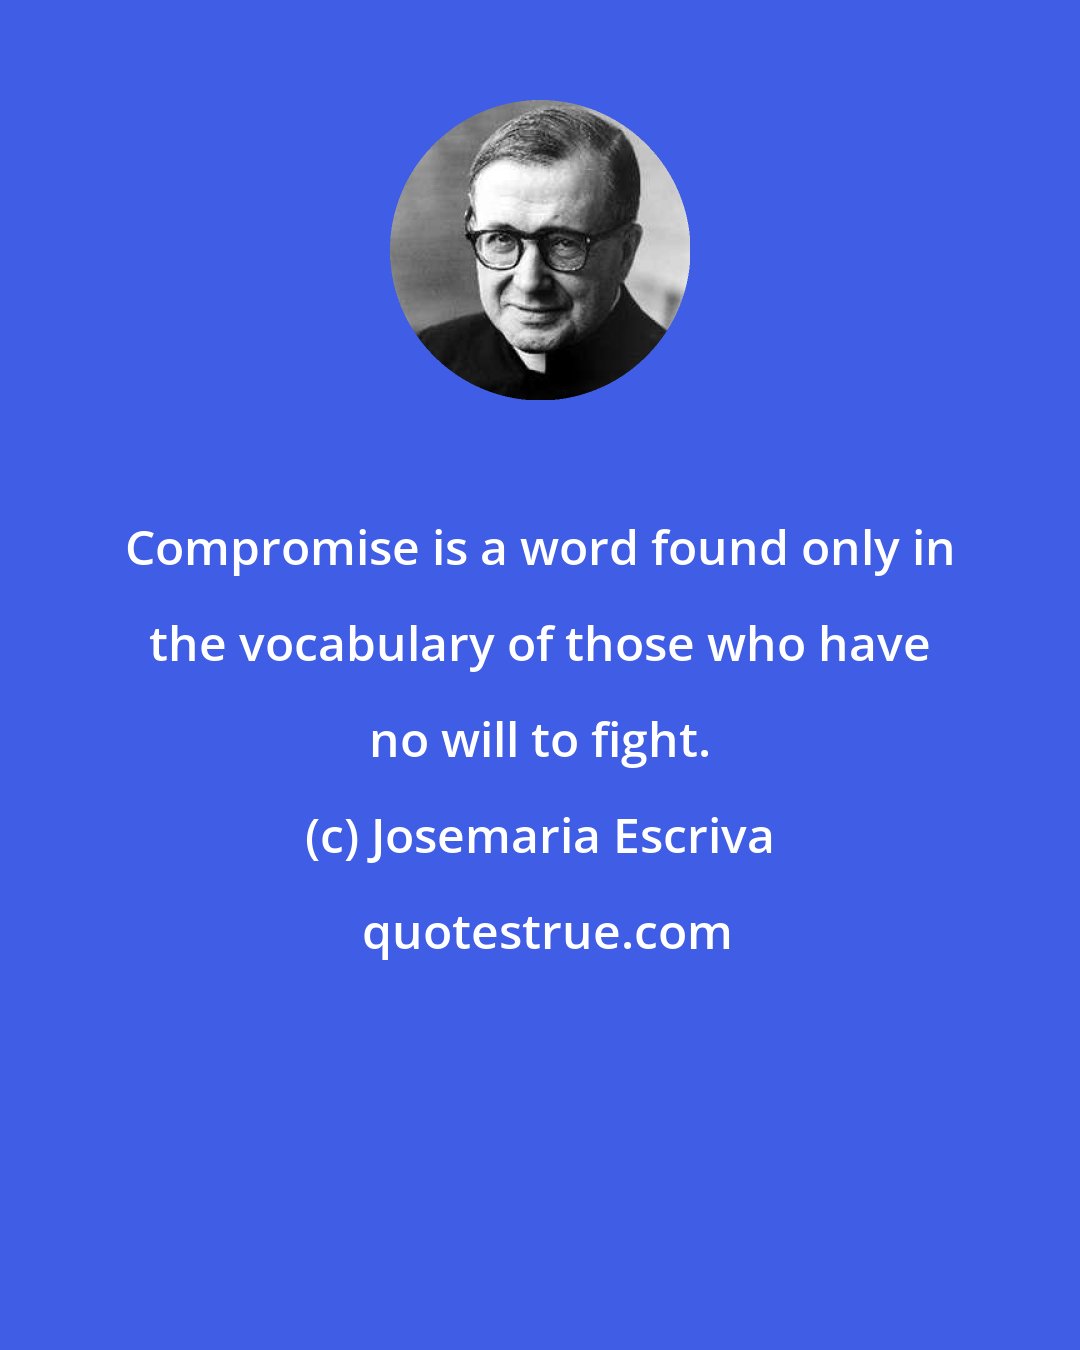 Josemaria Escriva: Compromise is a word found only in the vocabulary of those who have no will to fight.